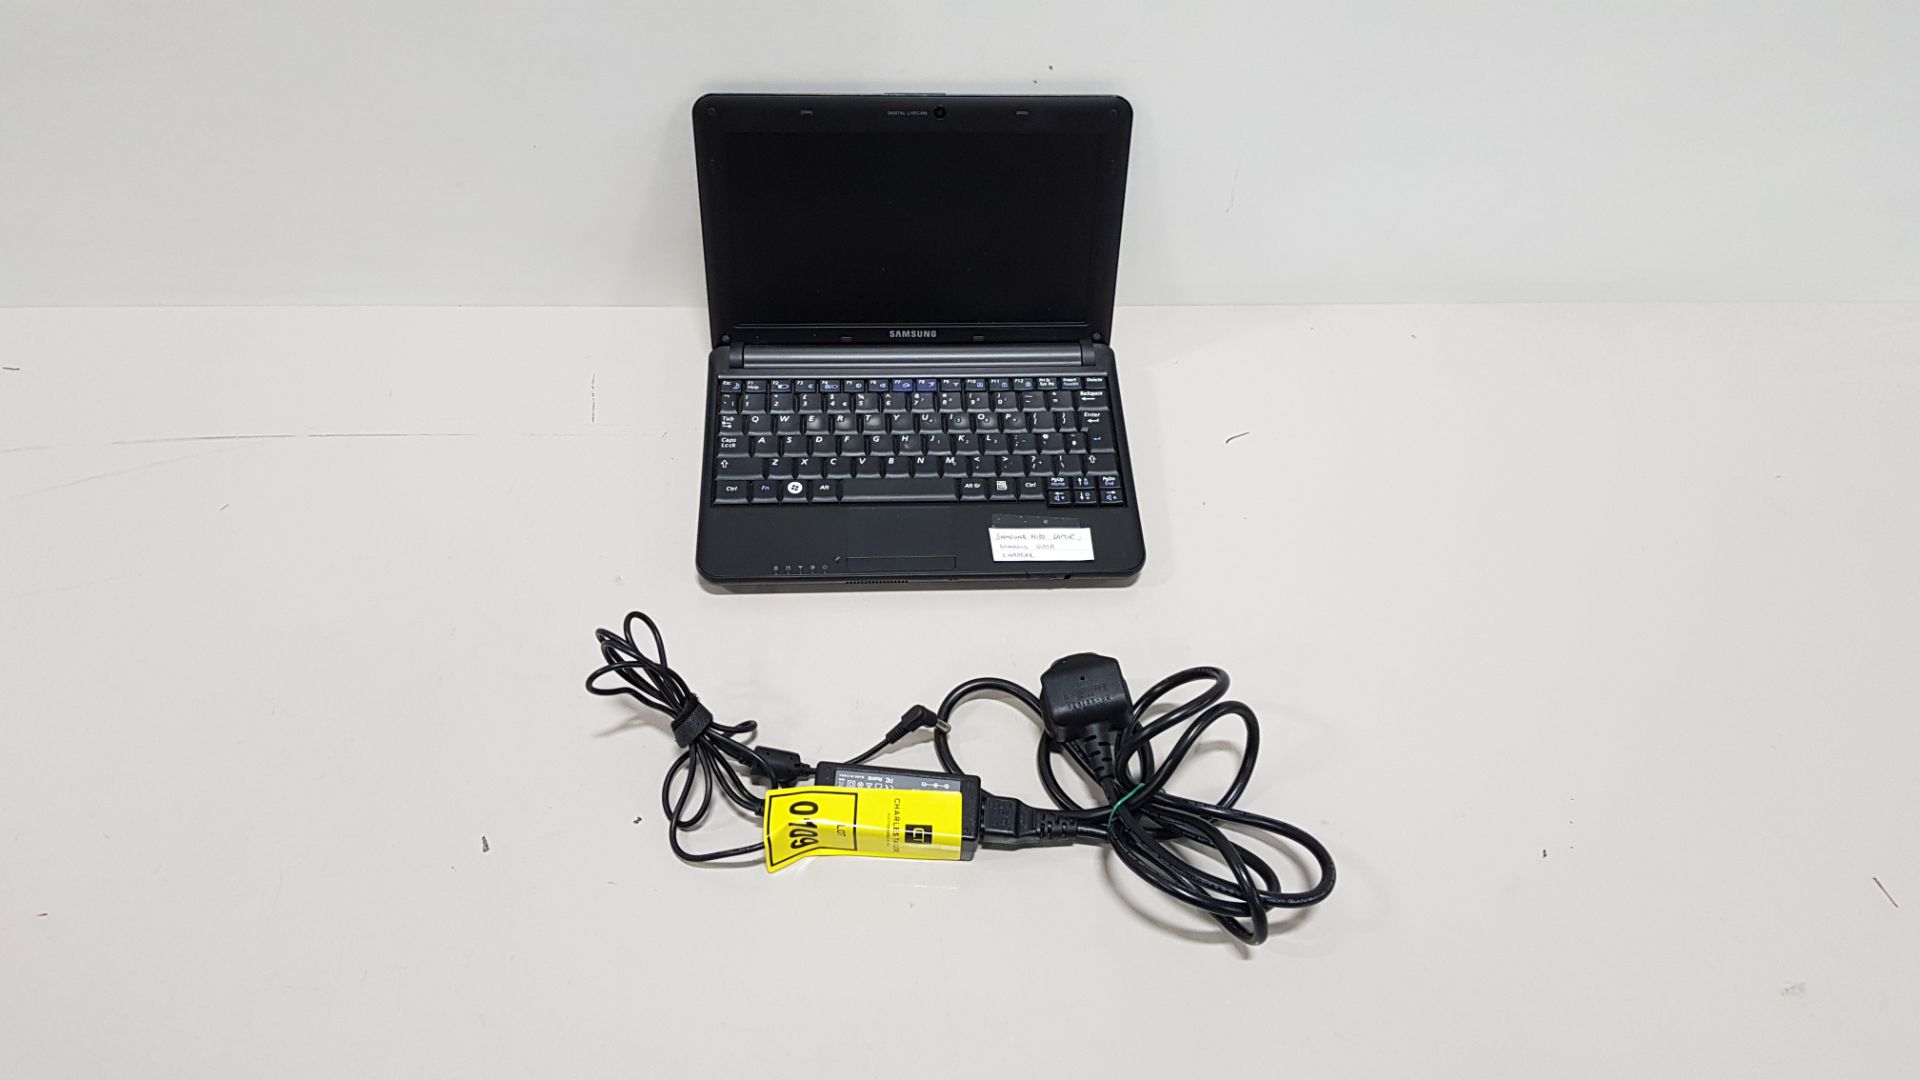 SAMSUNG N130 LAPTOP WINDOWS VISTA - WITH CHARGER